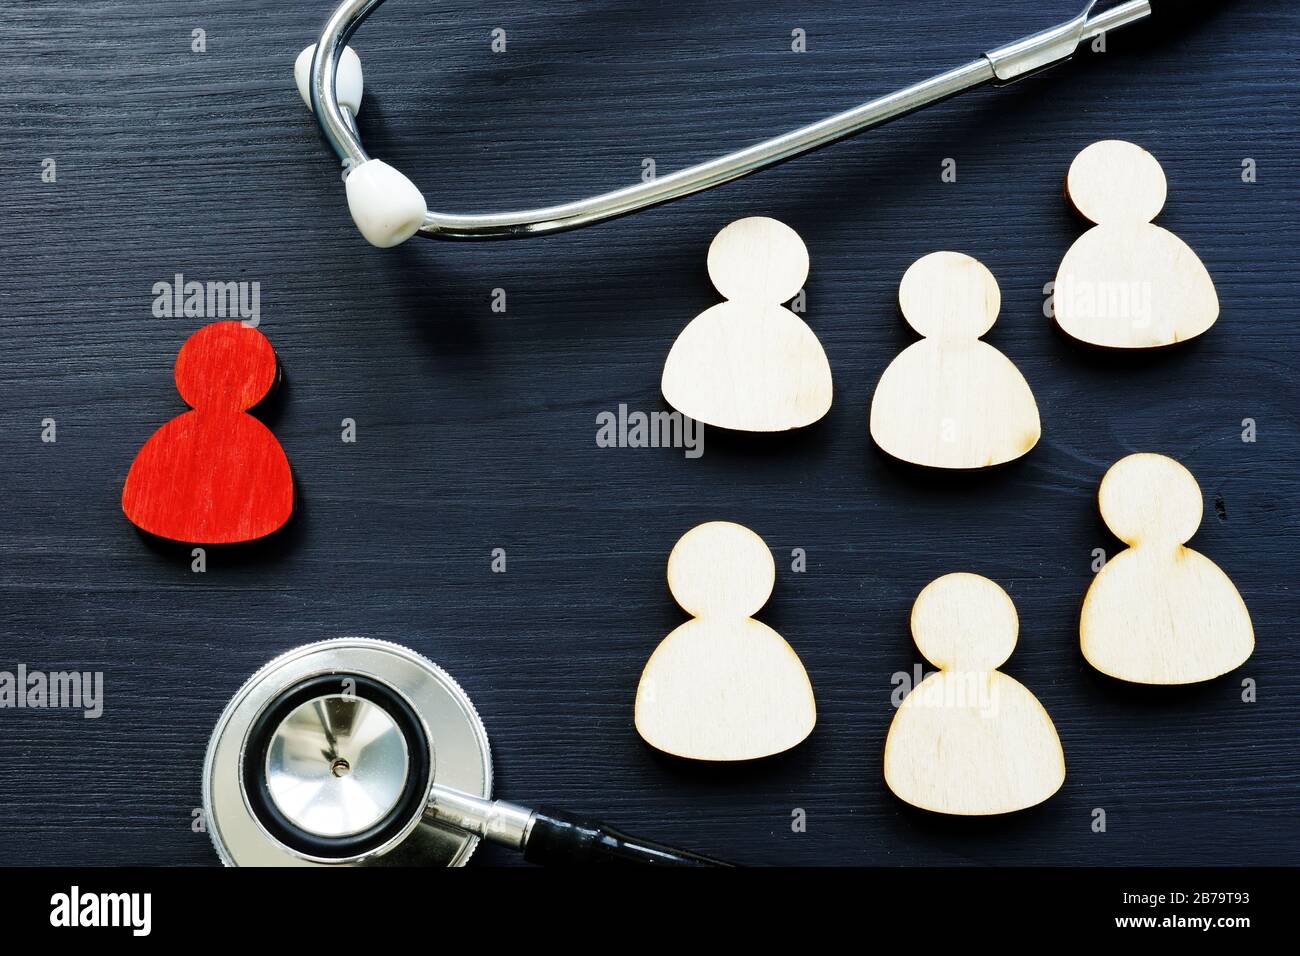 Stethoscope and a symbol of an infected patient. Spread of the epidemic of coronavirus and quarantine. Stock Photo